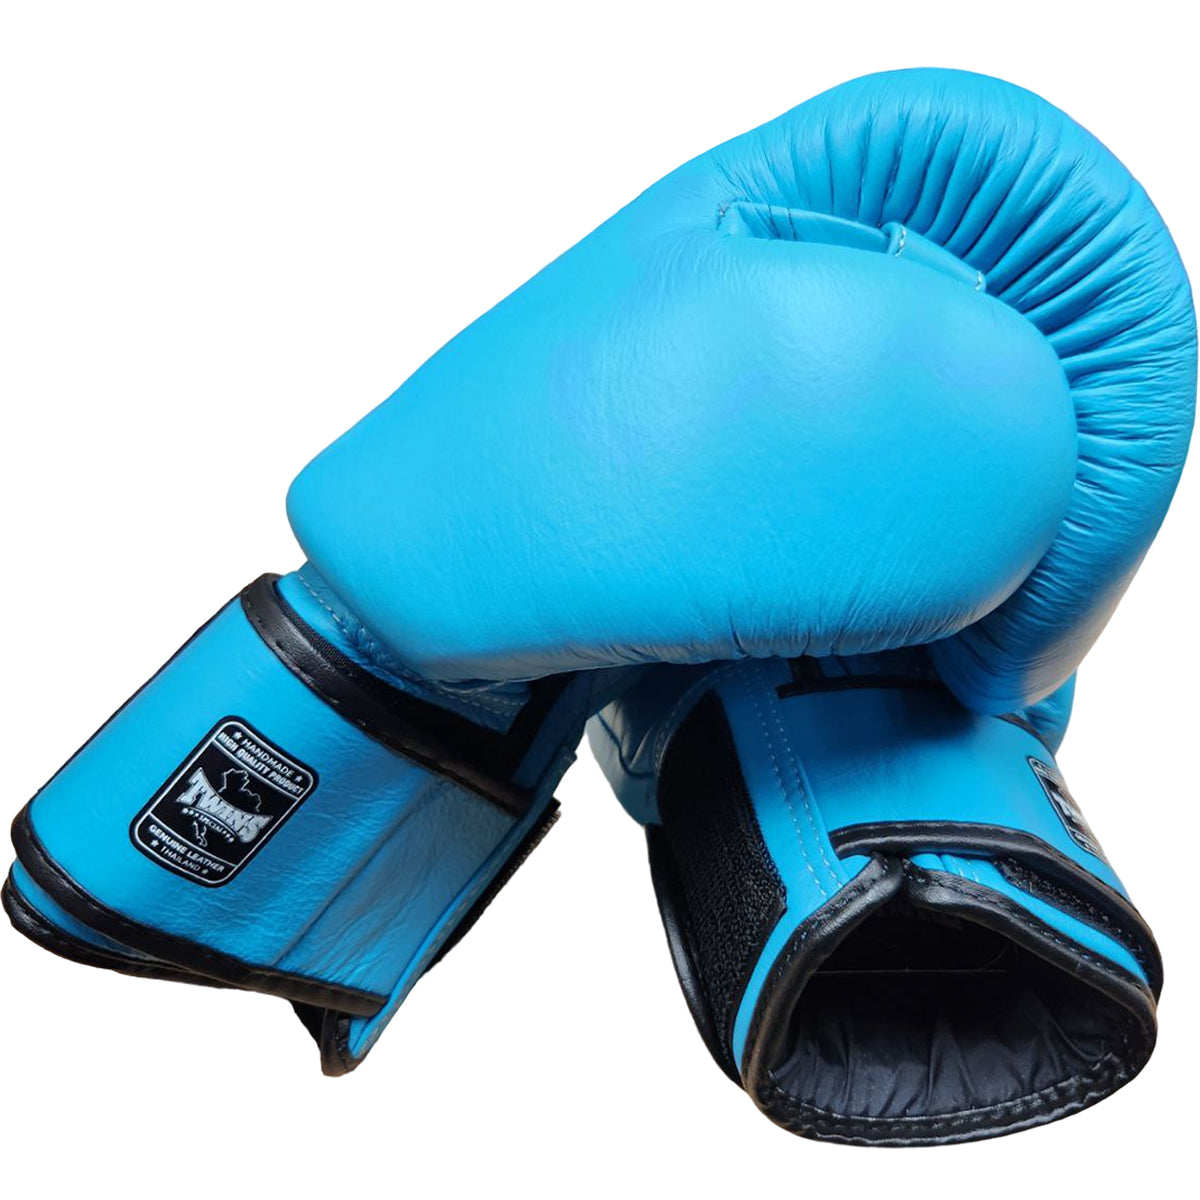 Boxing Gloves Twins Special BGVL3 Light Blue